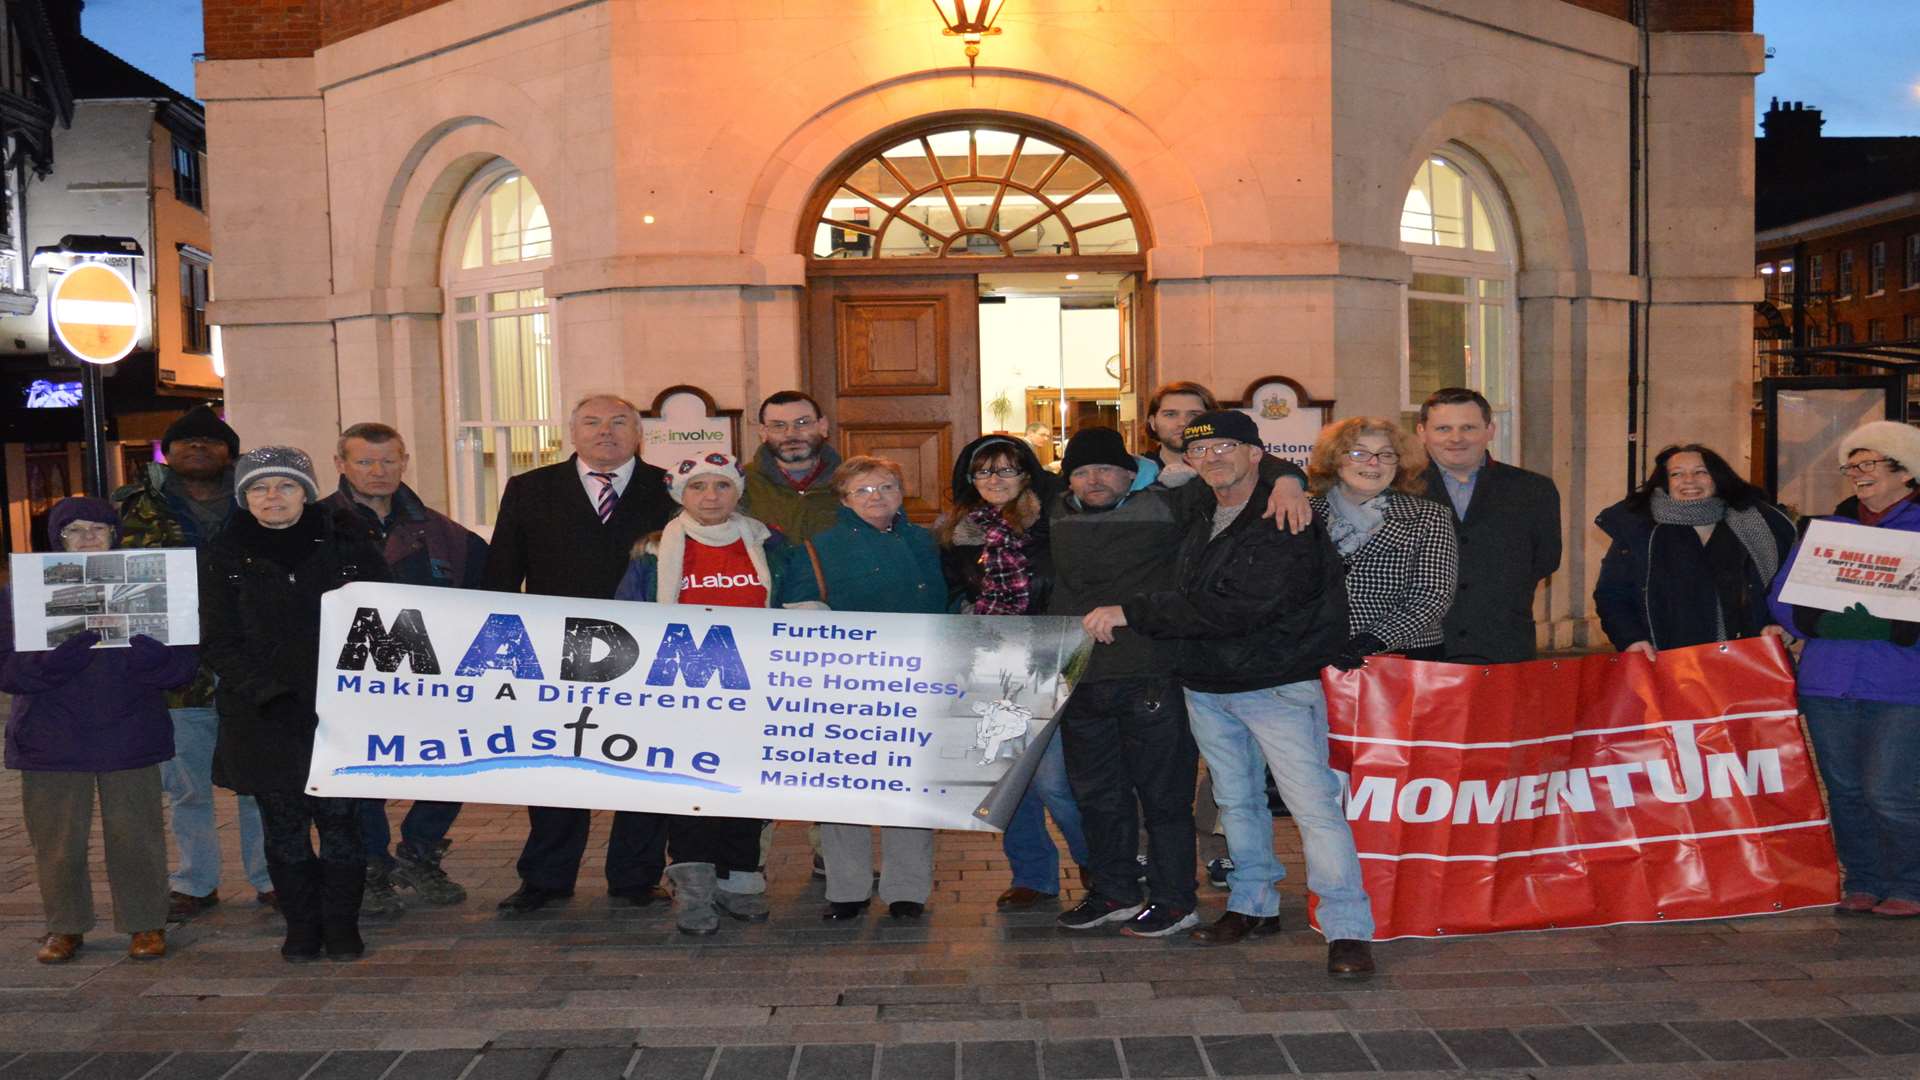 Maidstone borough councillors join Momentum activists and members of town's homeless community in Jubilee Square